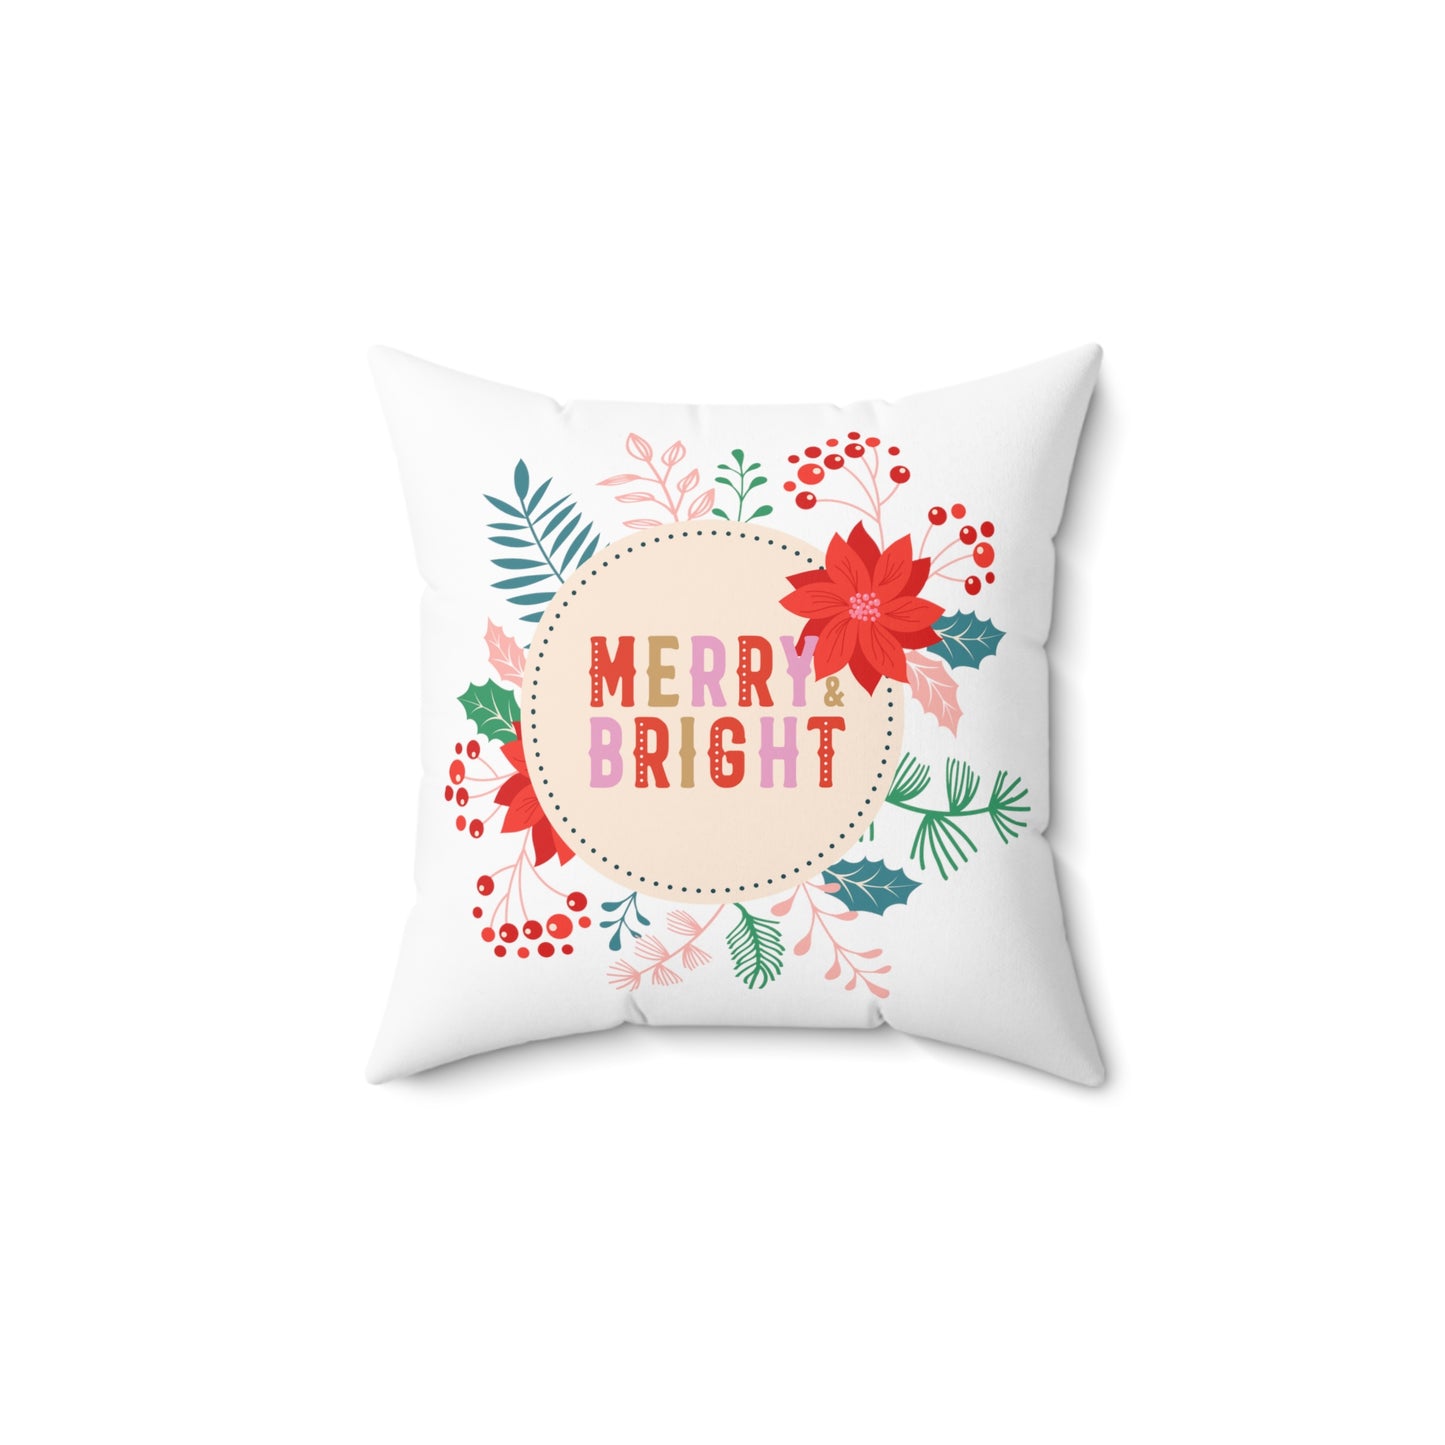 Merry Bright Printed Spun Polyester Square Pillow